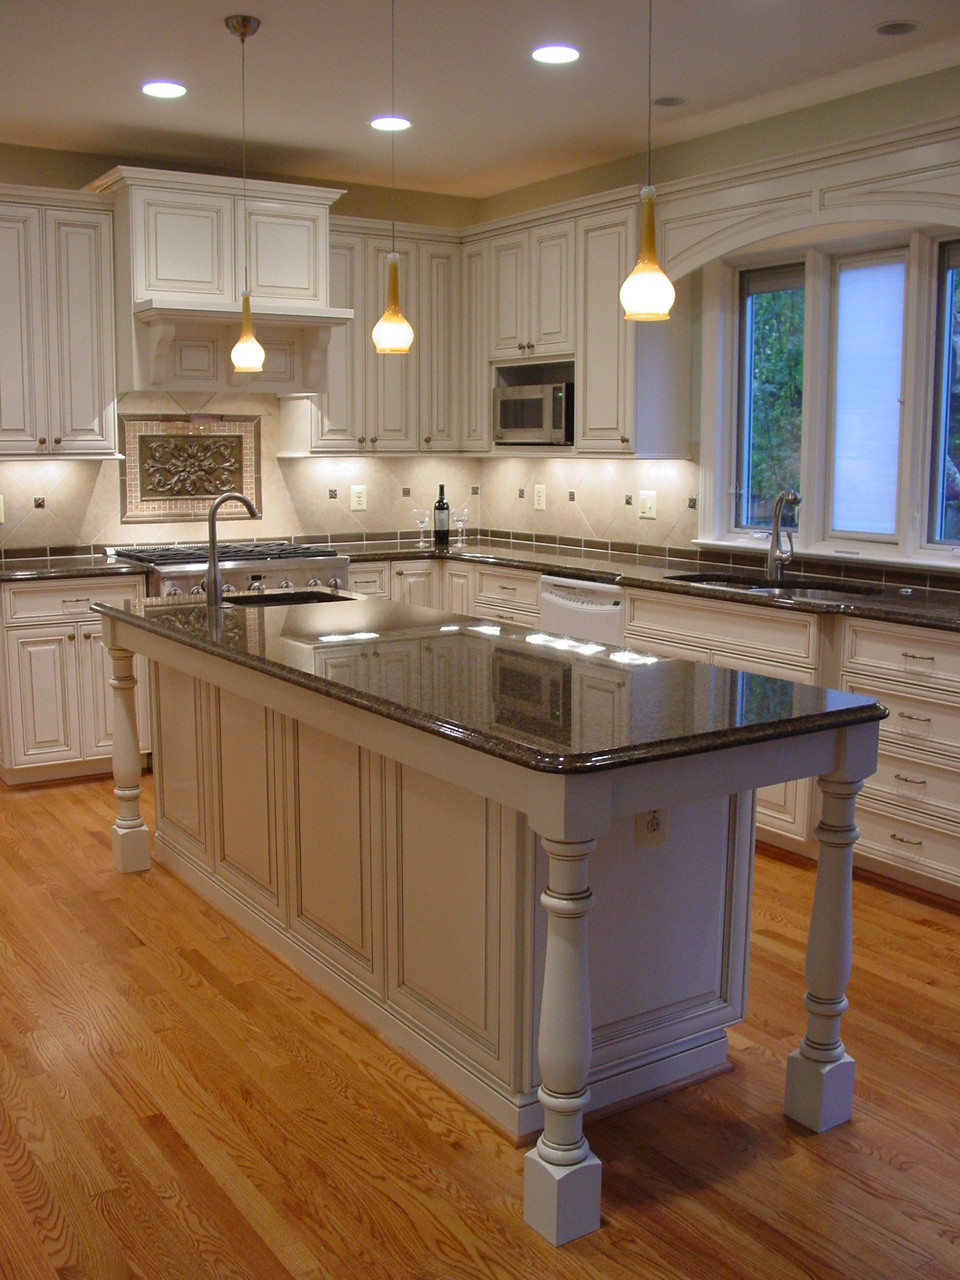 Kitchen Cabinets Remodel Ideas
 Kitchen Trends for 2015